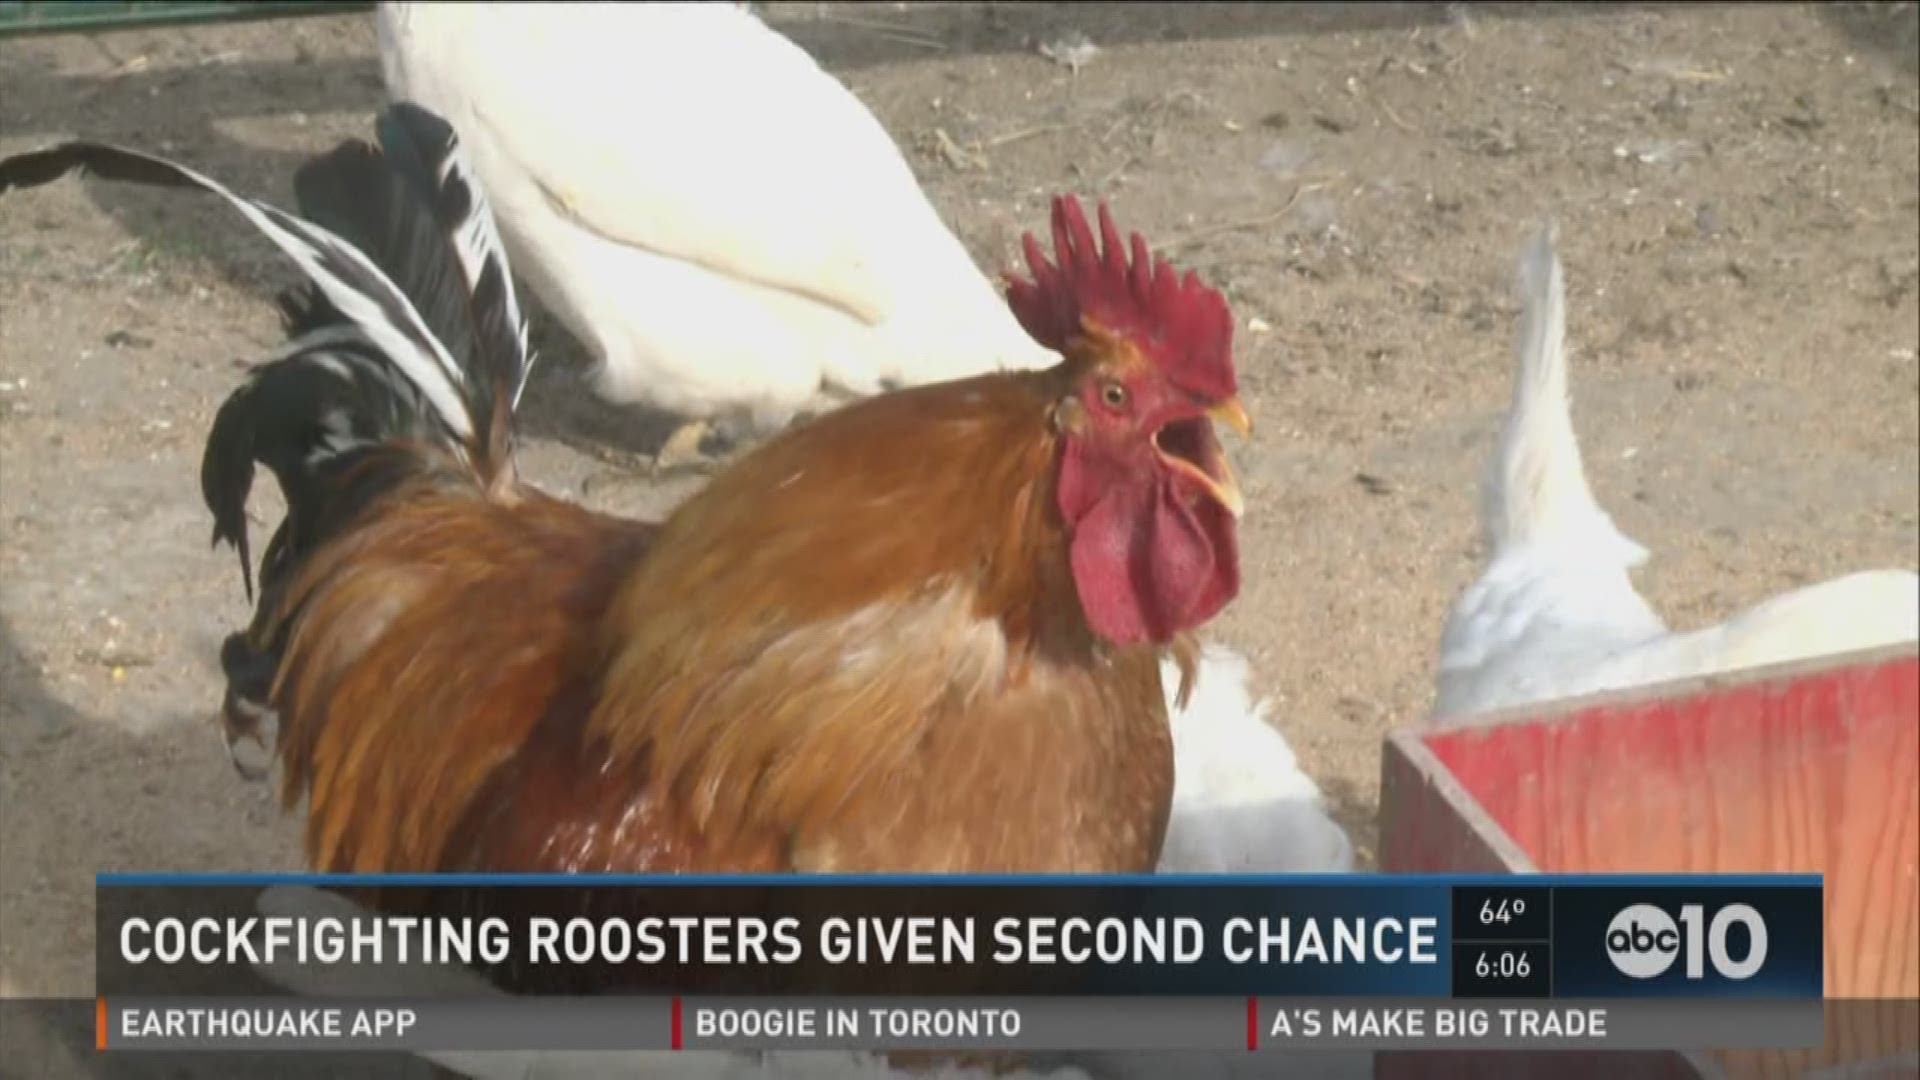 Five roosters rescued and given a second chance after being rescued from a cockfighting operation.